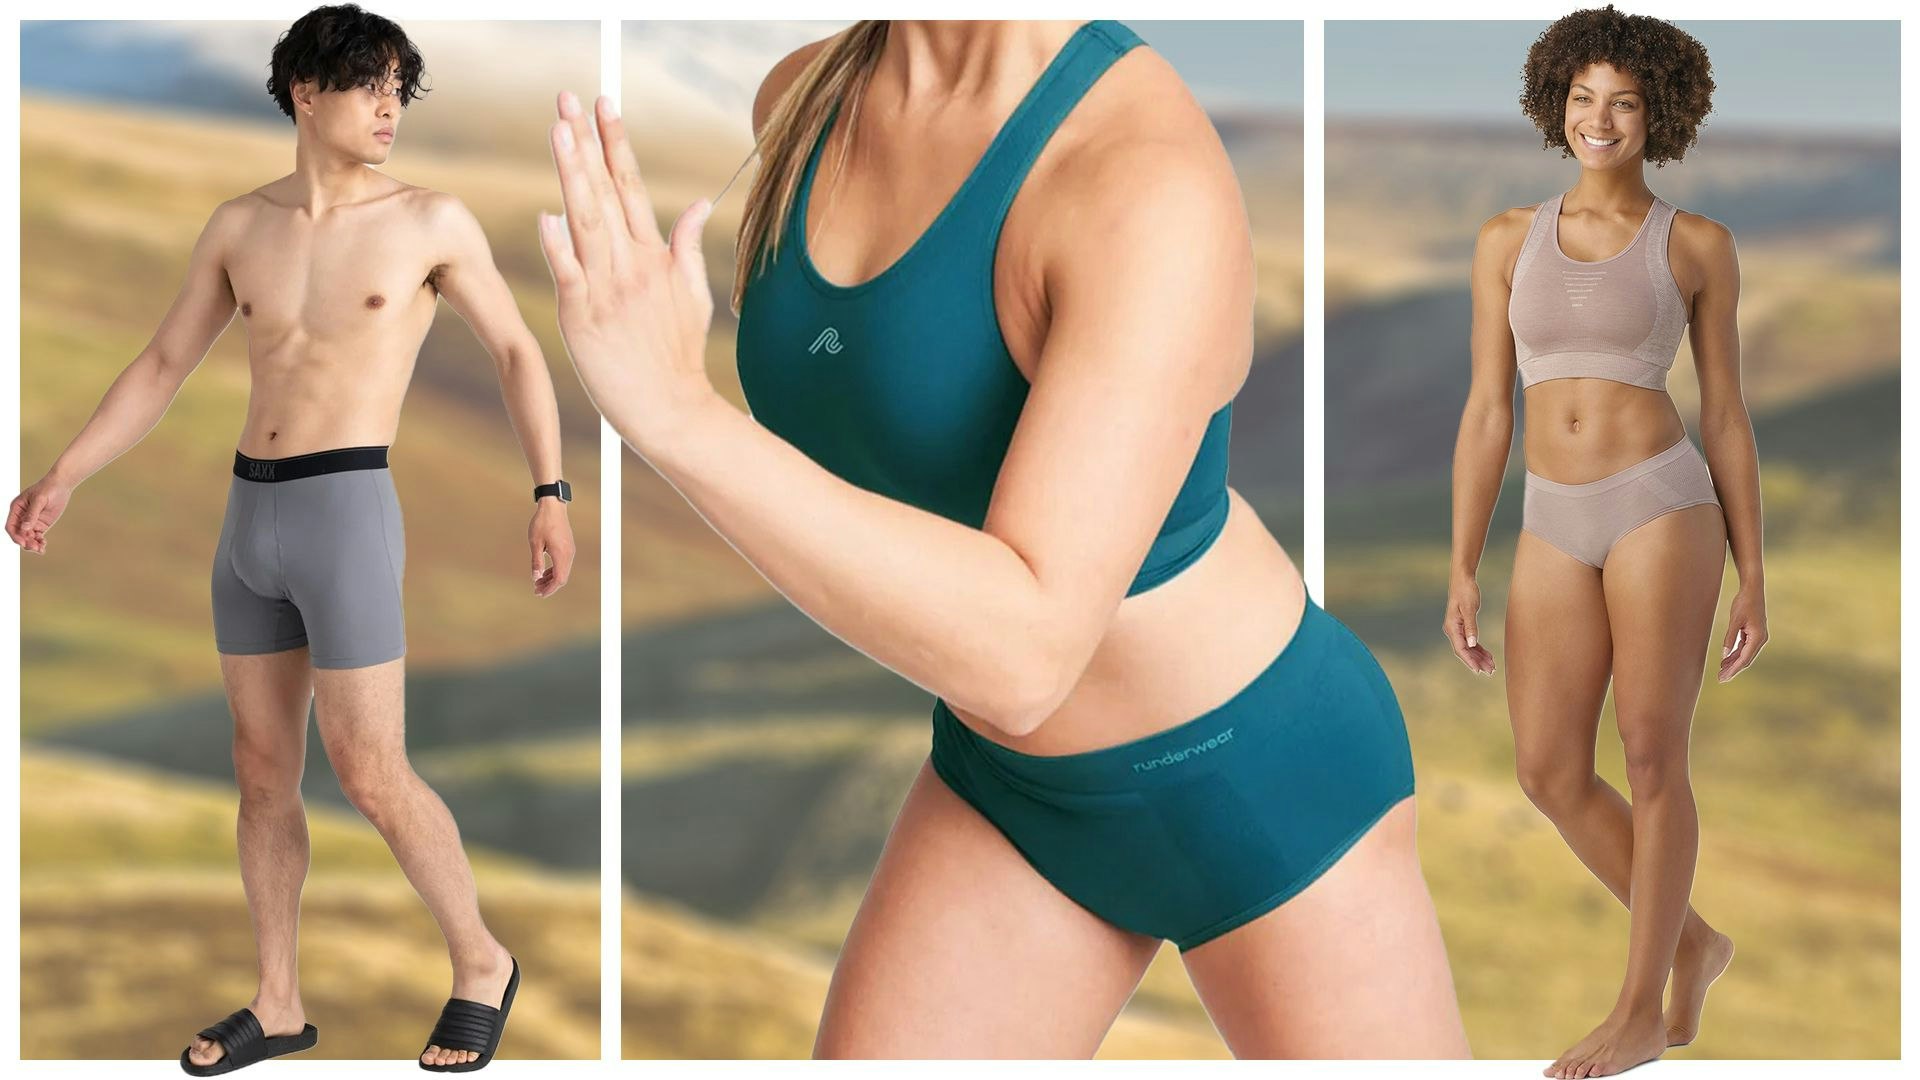 The Best Underwear for the Outdoors? A Speedo.